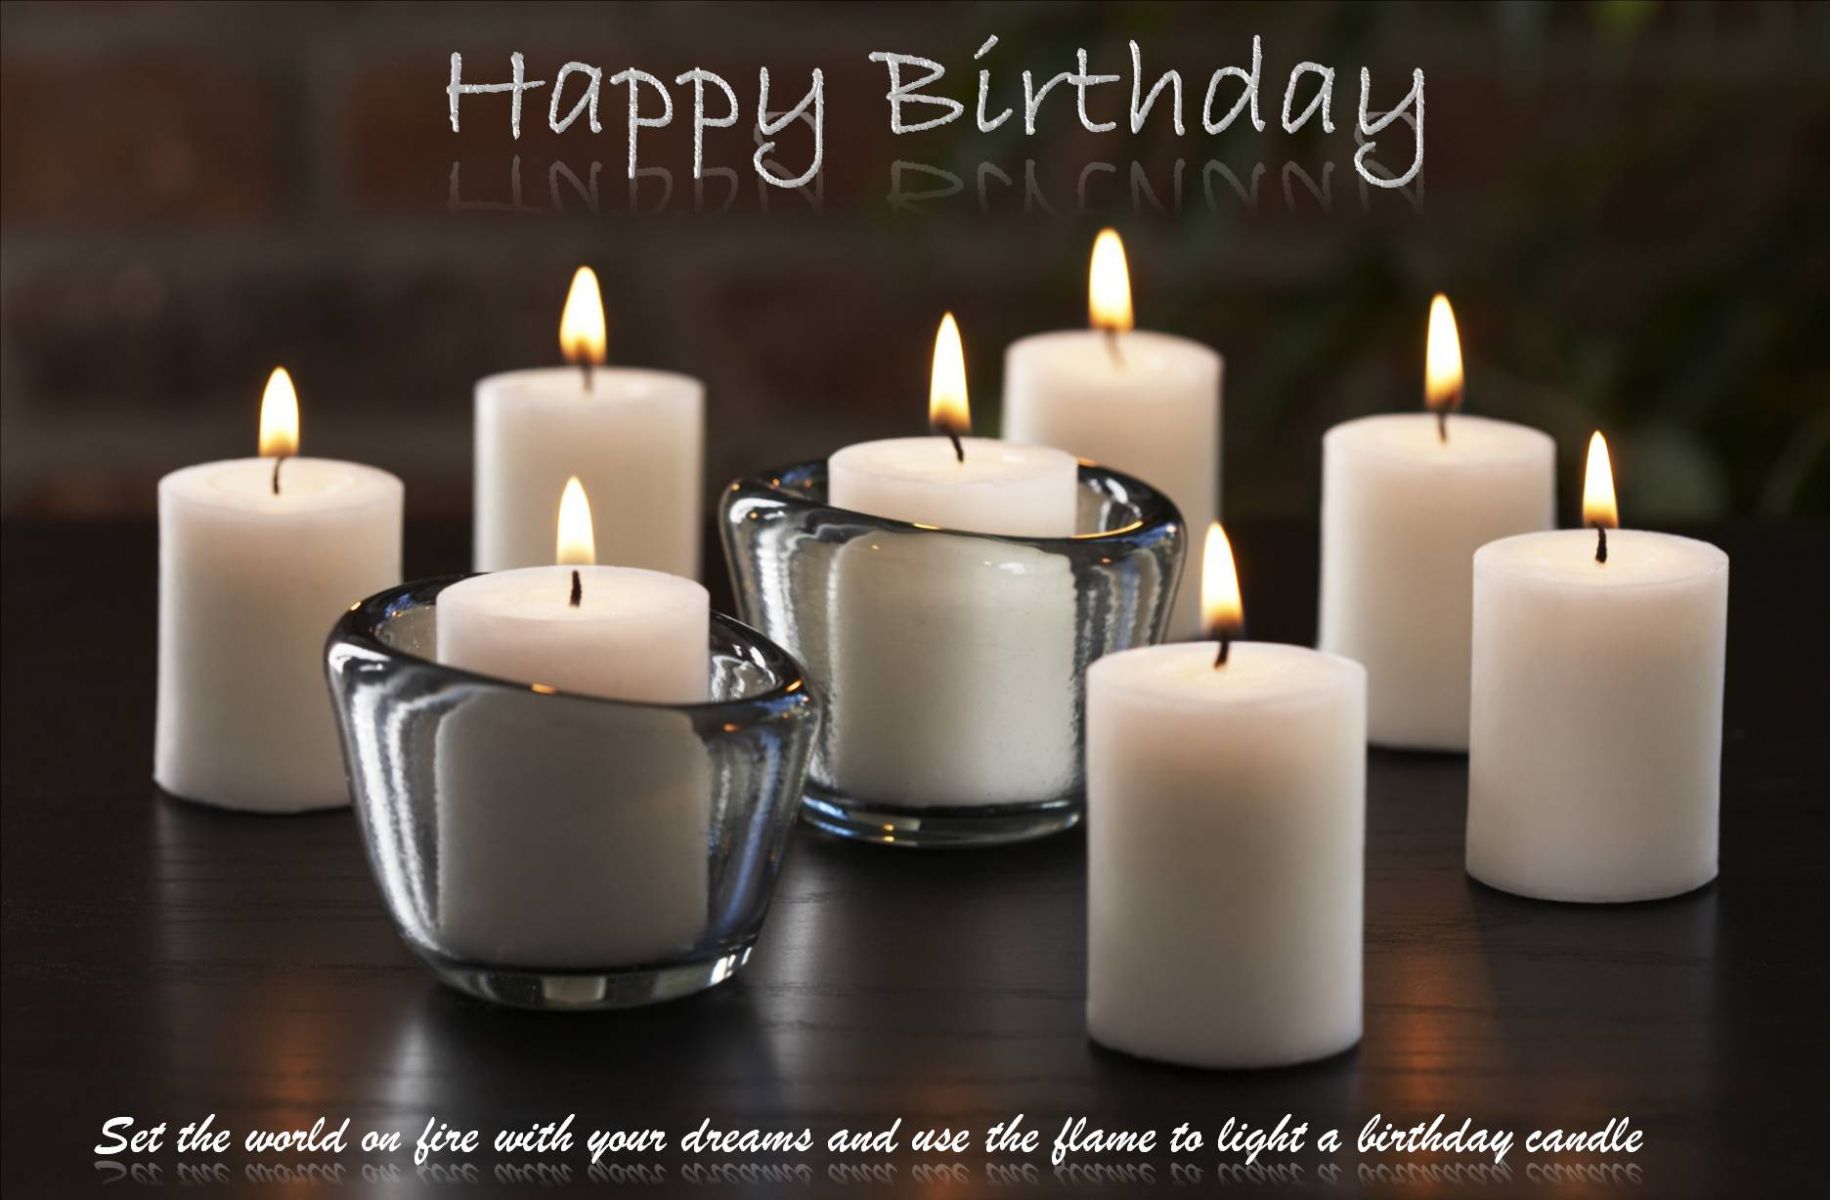 Happy Birthday Quote To Friend Hd Wallpaper Wallpaper - Birthday Wishes With Candle Light - HD Wallpaper 